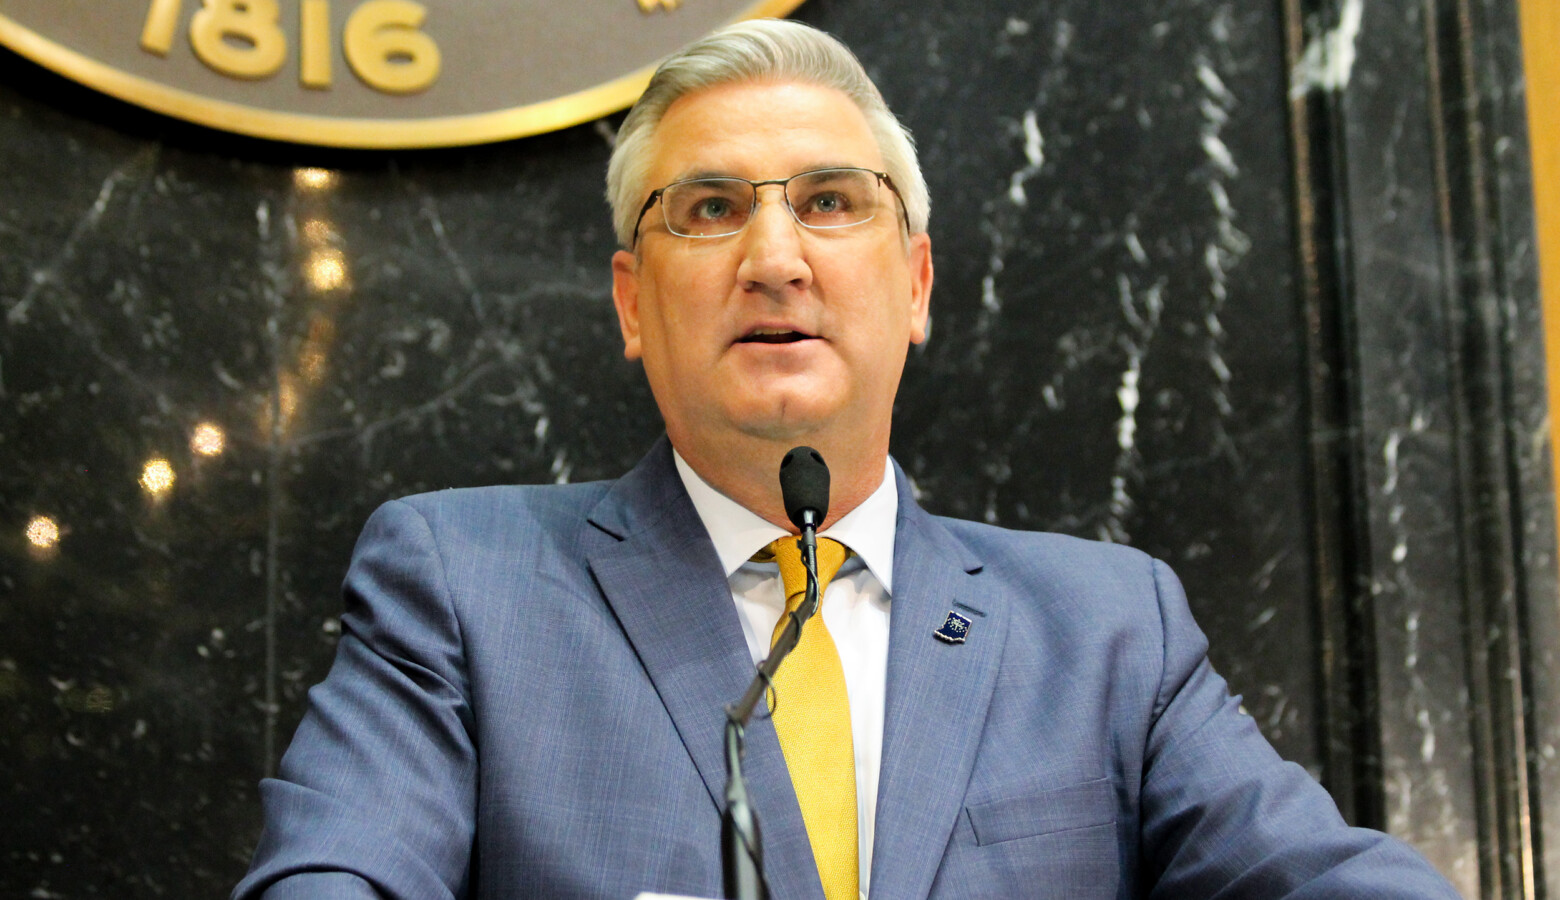 Gov. Eric Holcomb says he’s confident he has the legal authority for his order requiring Hoosiers to wear masks in public. (Lauren Chapman/IPB News)